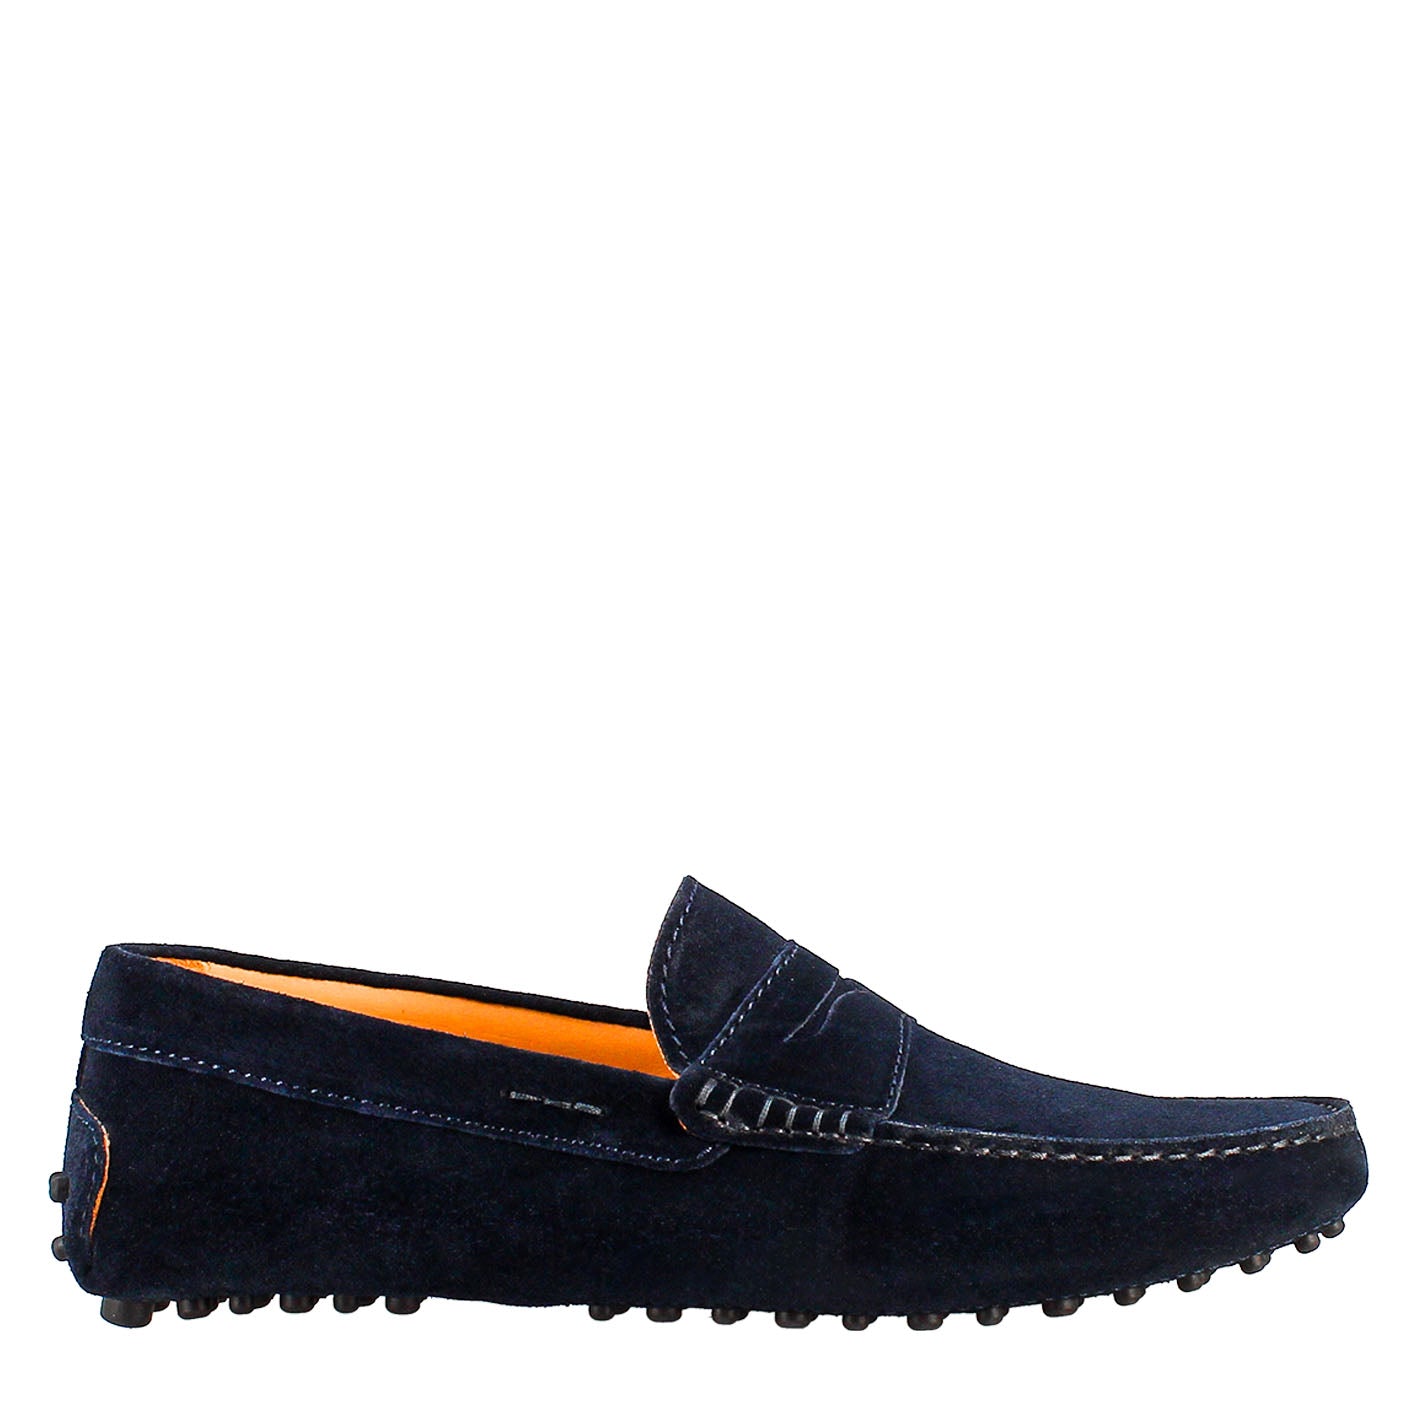 Handmade Men's CARSHOE Loafers in Navy Blue Suede Leather.